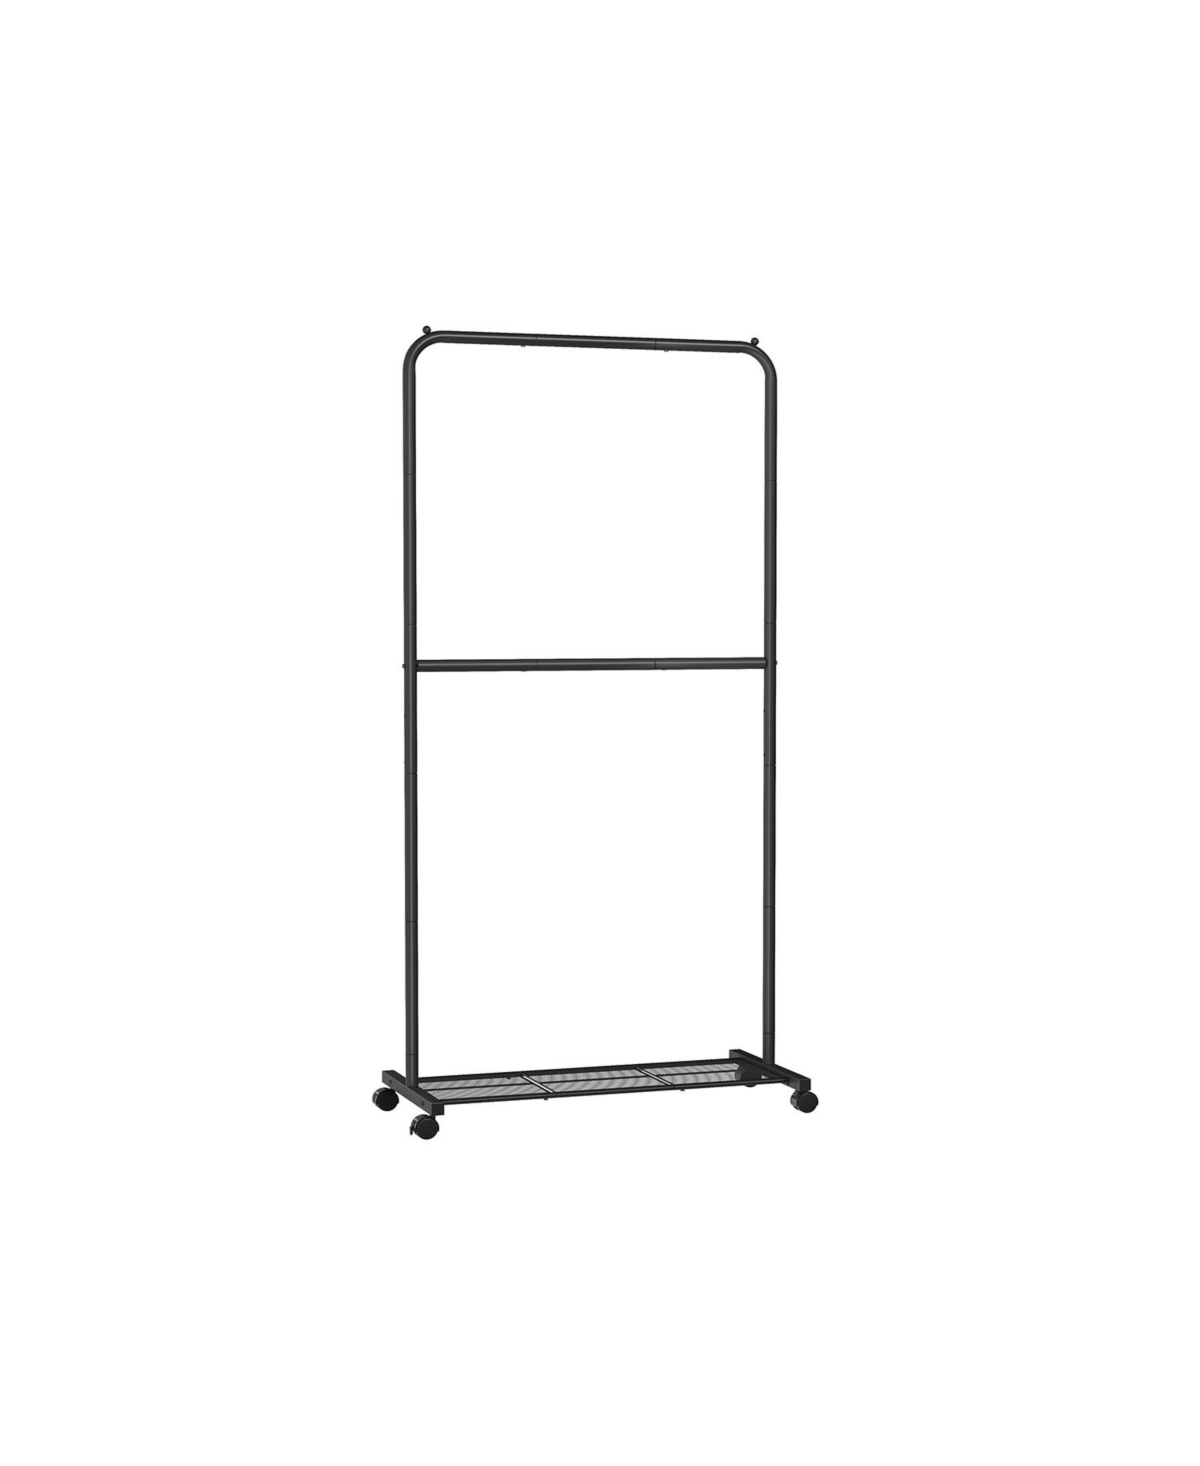 36 Inch Double-rod Clothes Rack With Wheels - Black